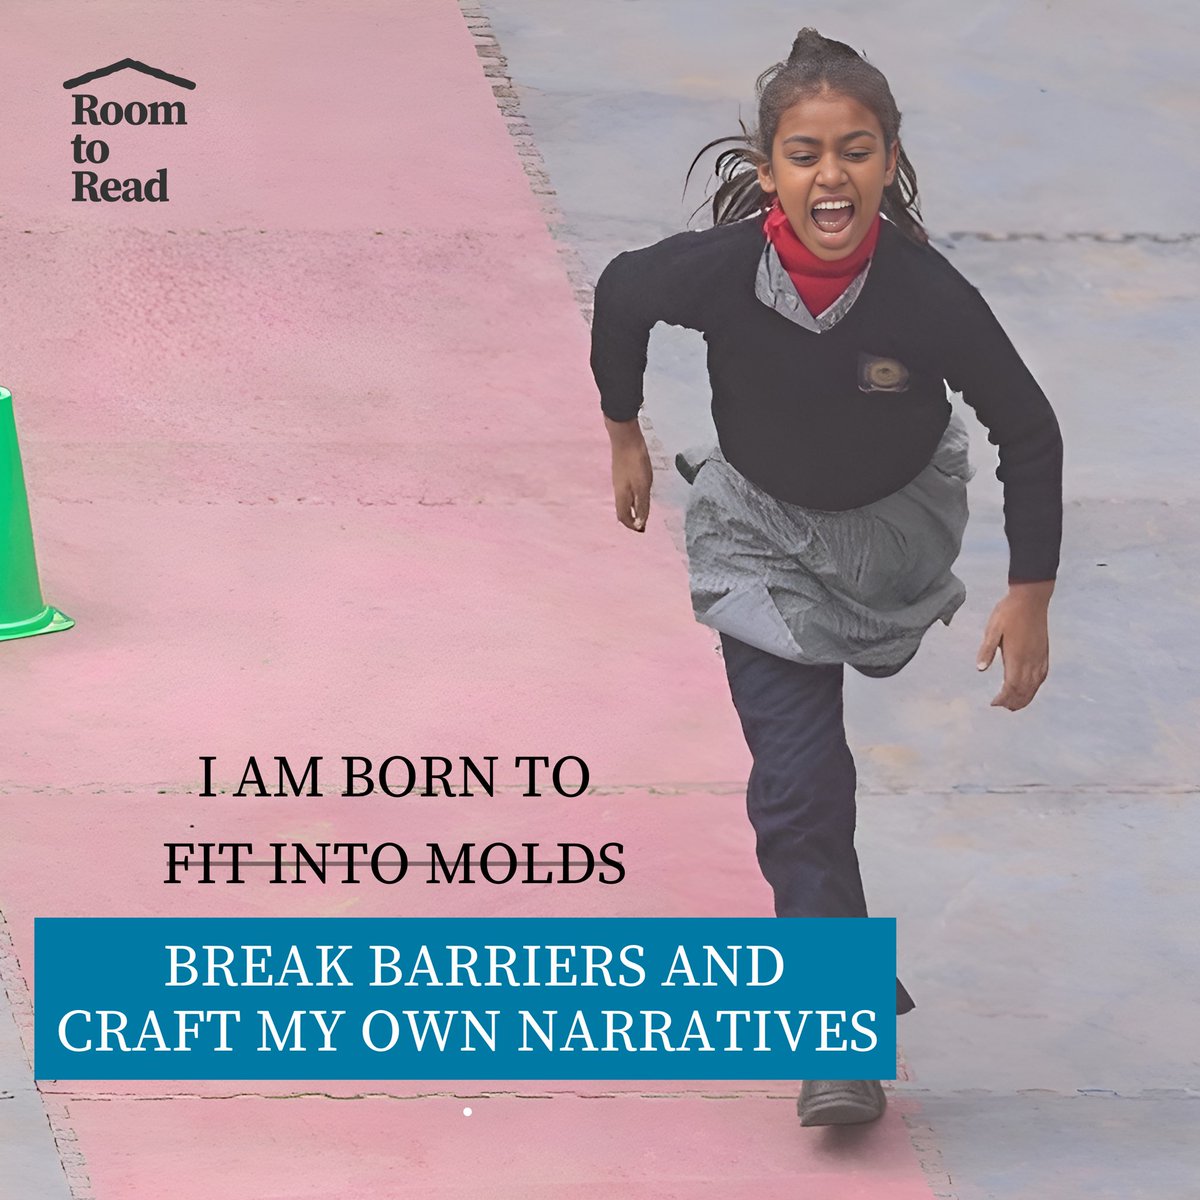 She embraces the power within her to navigate through challenges and reach limitless possibilities, empowering herself along the way! 💪✨
@roomtoreadindia supports “𝓗𝓔𝓡”  in this transformative journey through #LifeSkills.👭
#girlseducation #genderequality #shecreateschange